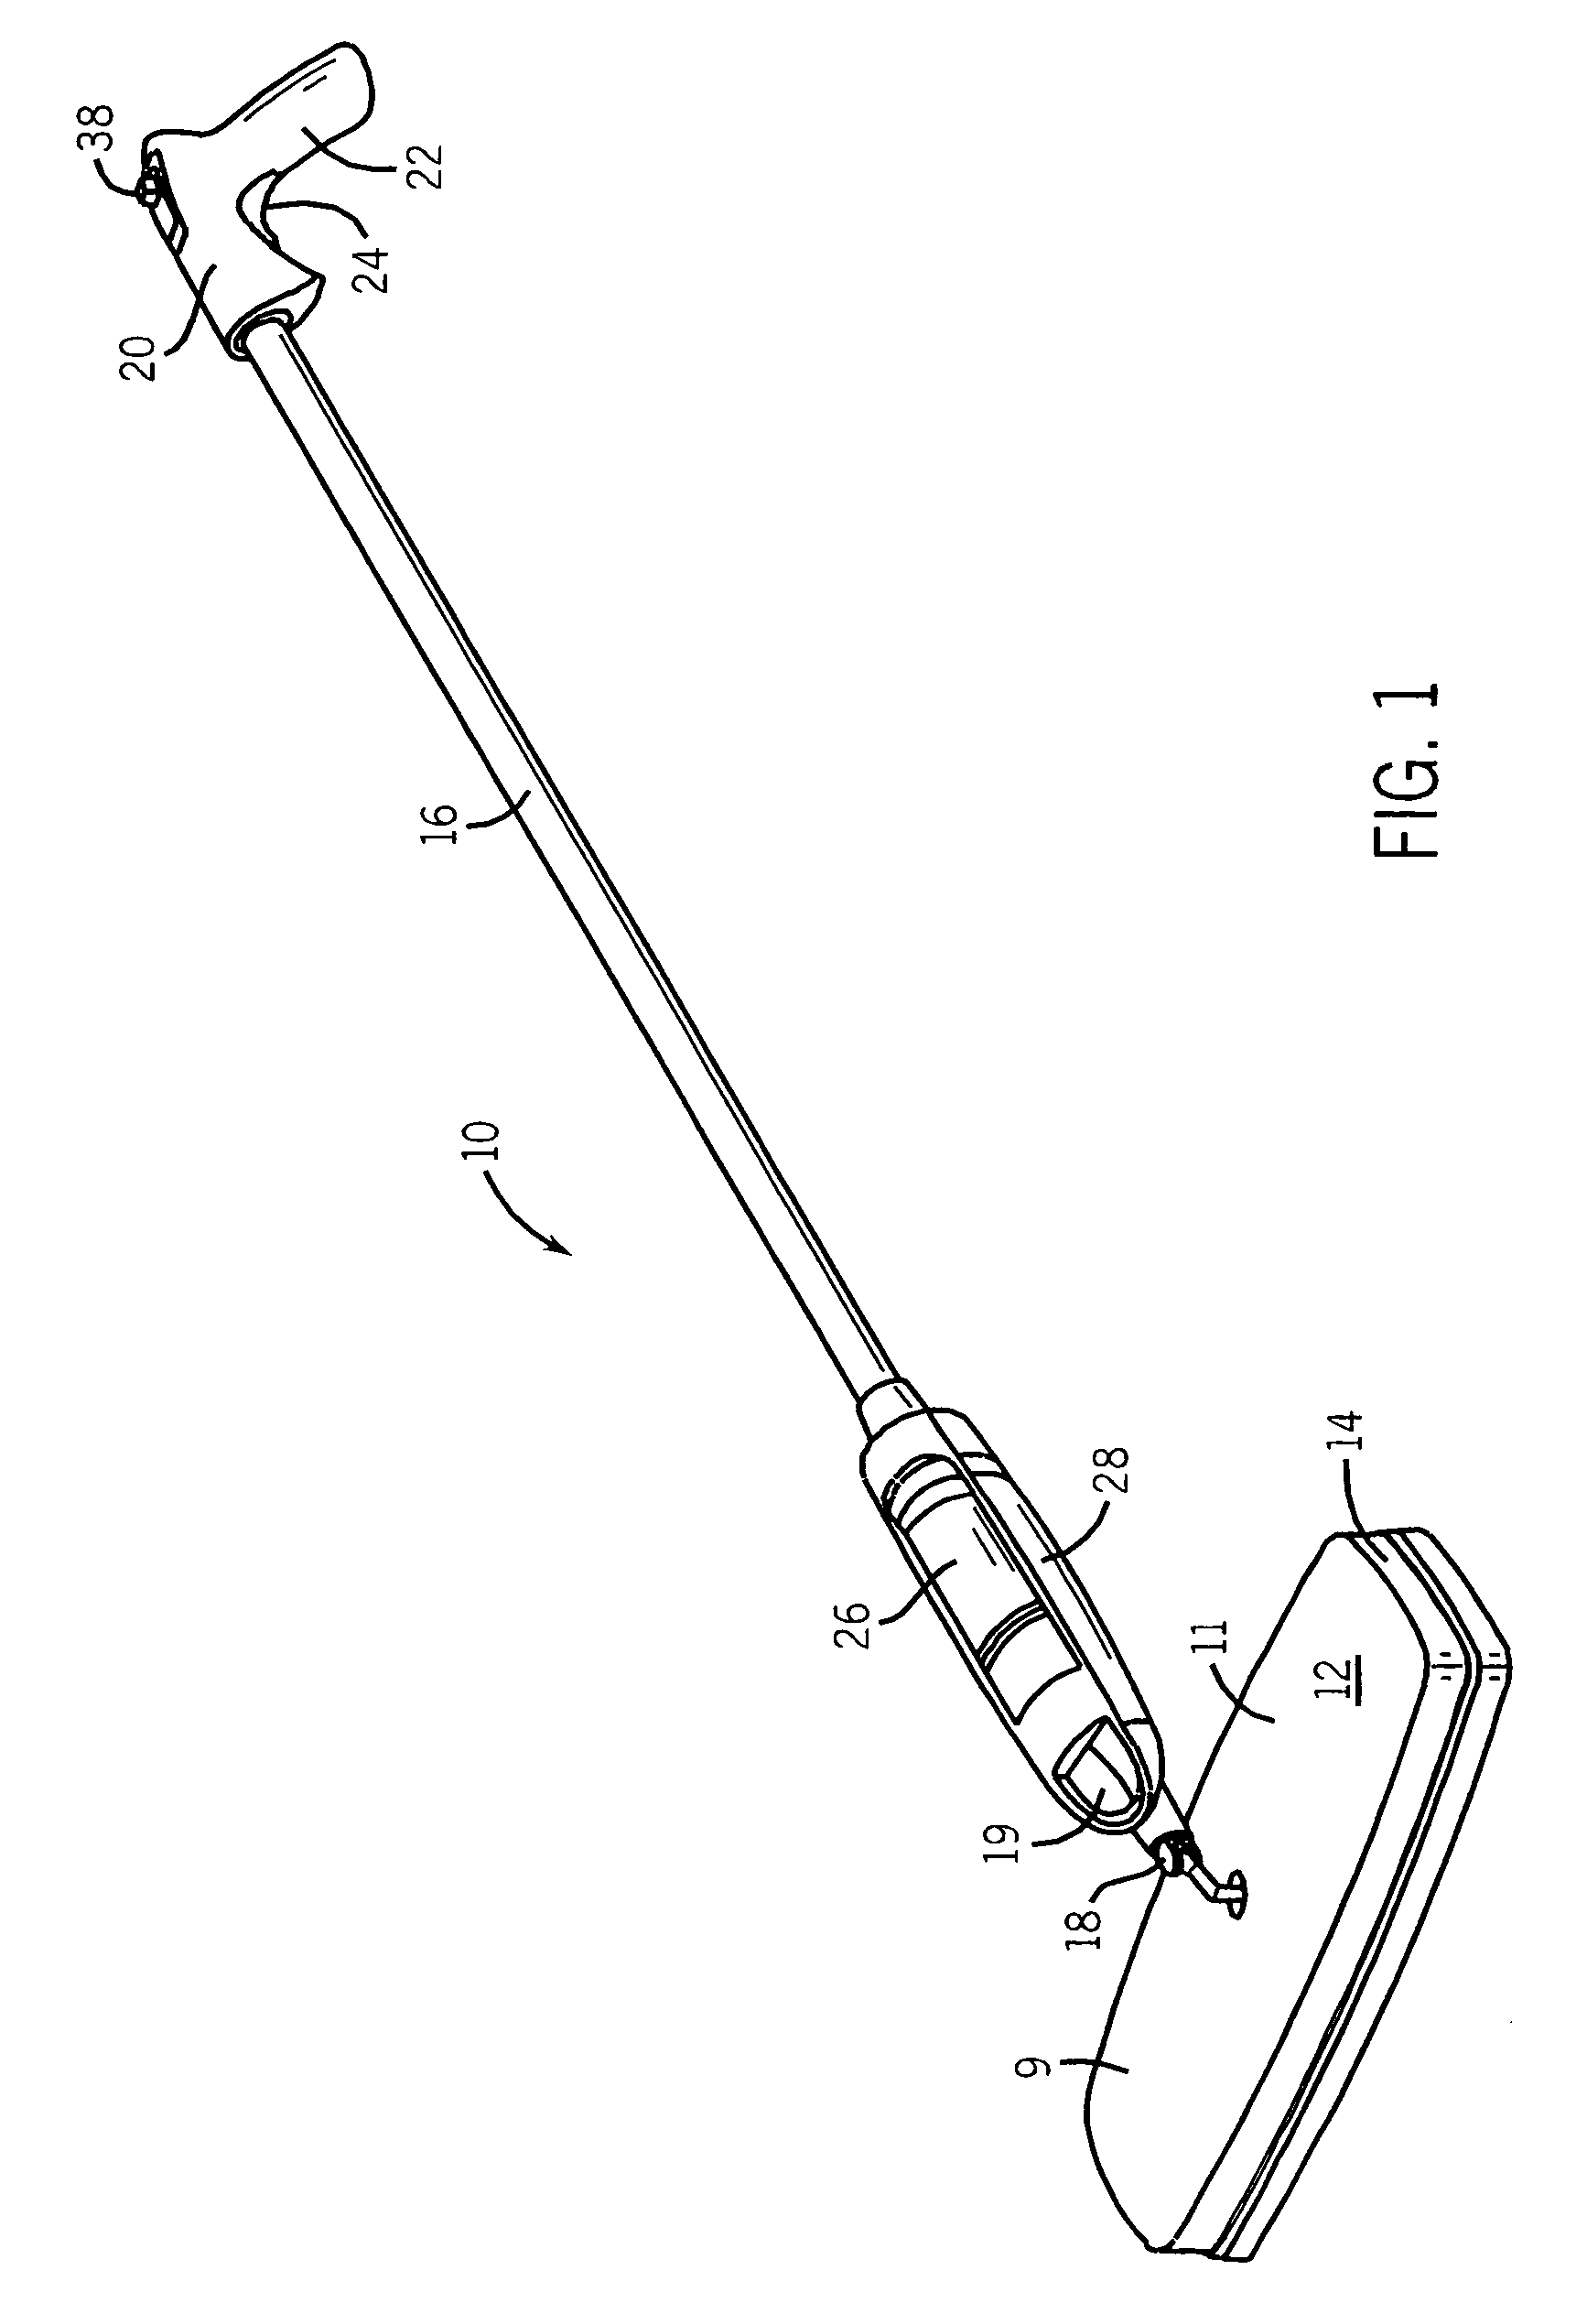 Floor cleaning device with motorized vibratory head